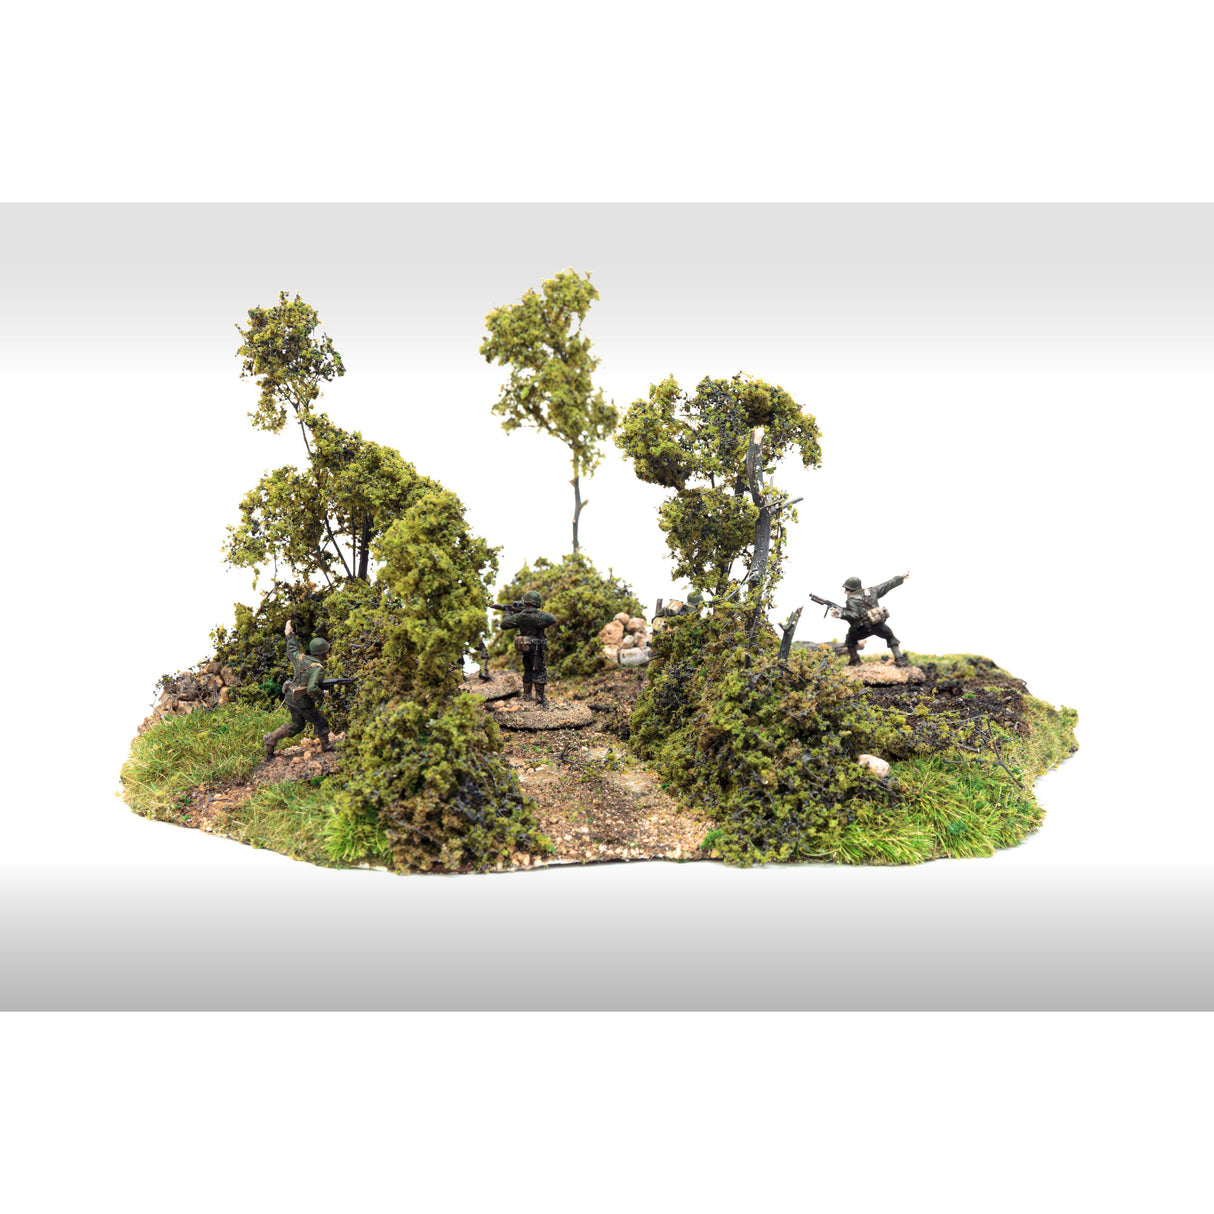 Brambles - Fall - Fall Brambles are ideal for drier environments on your miniature base or gaming board